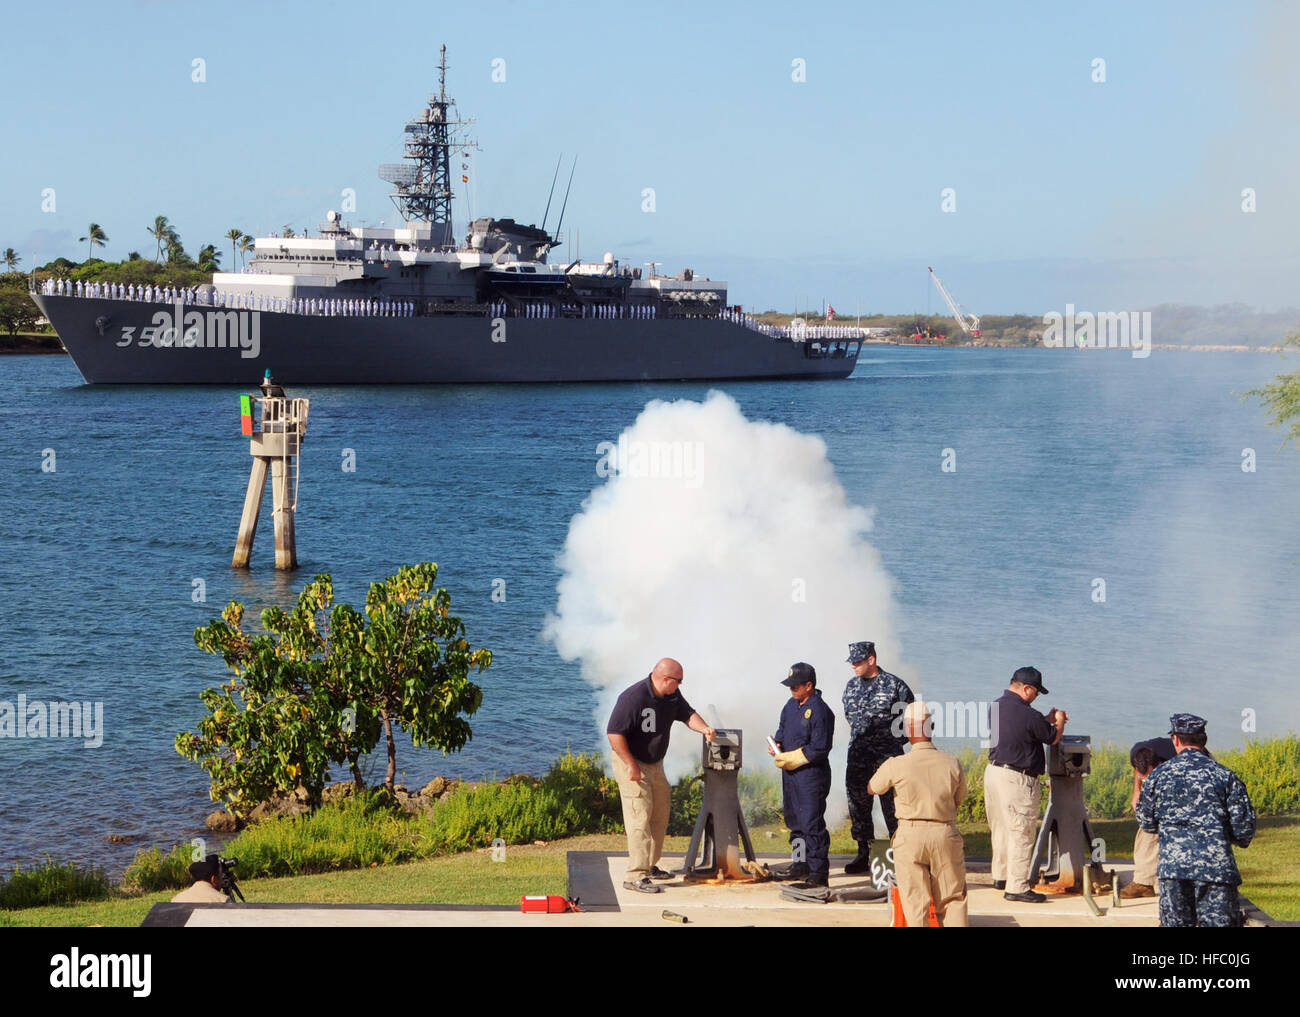 Members of Lockheed Martin and Joint Base Pearl Harbor-Hickam Security Department perform a 21-gun salute for the arrival of the Japan Maritime Self-Defense Force training squadron ship JS Kashima (TV 3508) for a port visit. This year marks the 50th anniversary of the U.S. and Japan Treaty of Mutual Cooperation of Security that in 1960 established the alliance between the two countries. (U.S. Navy photo by Seaman Rachel Swiatnicki/Released) 21-gun salute 288920 Stock Photo